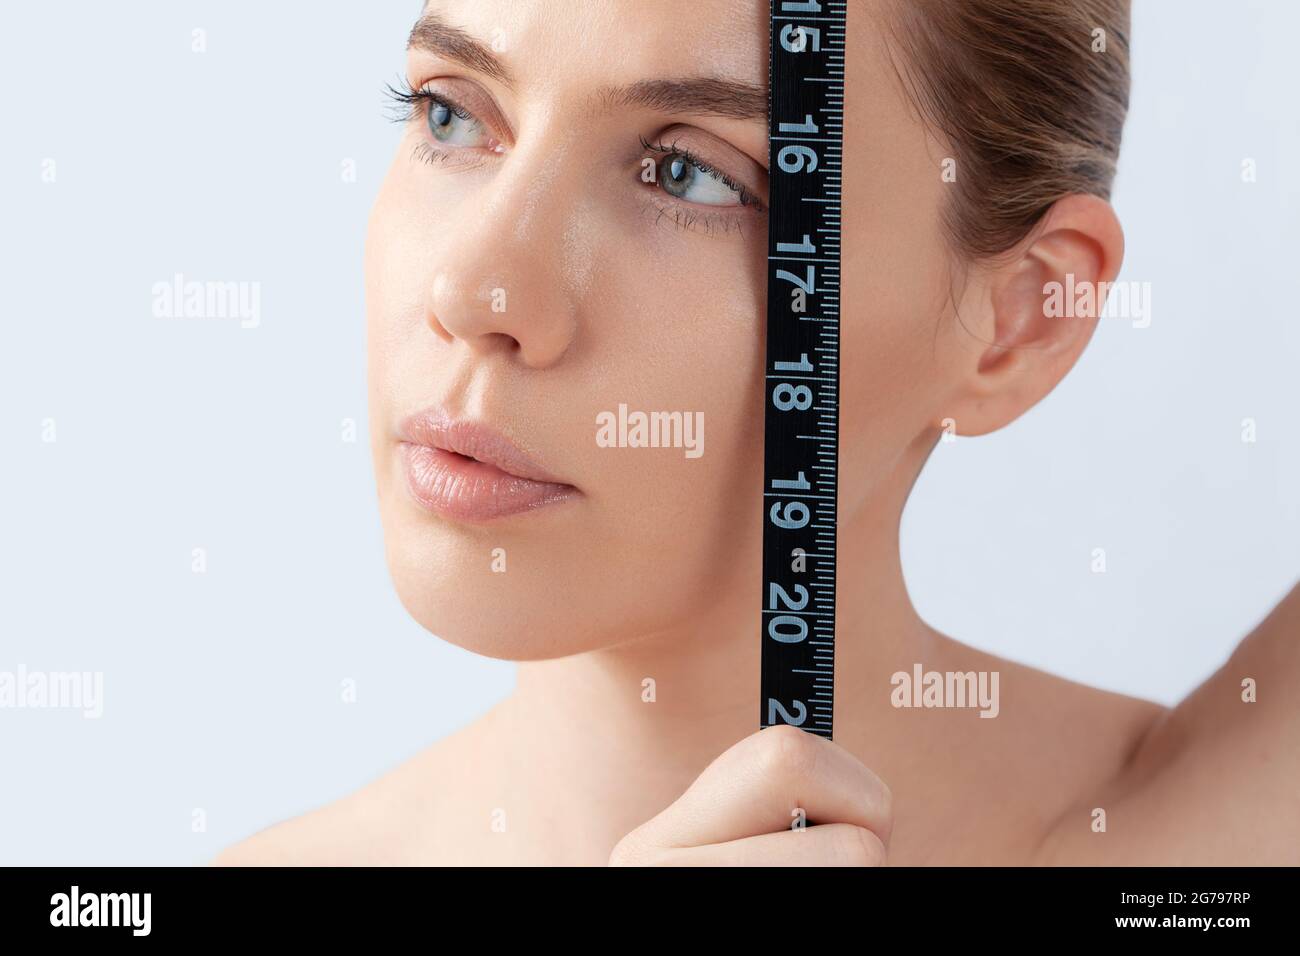 Woman with measuring tape, symbol beauty, pure skin, cosmetic surgery, be perfect Stock Photo